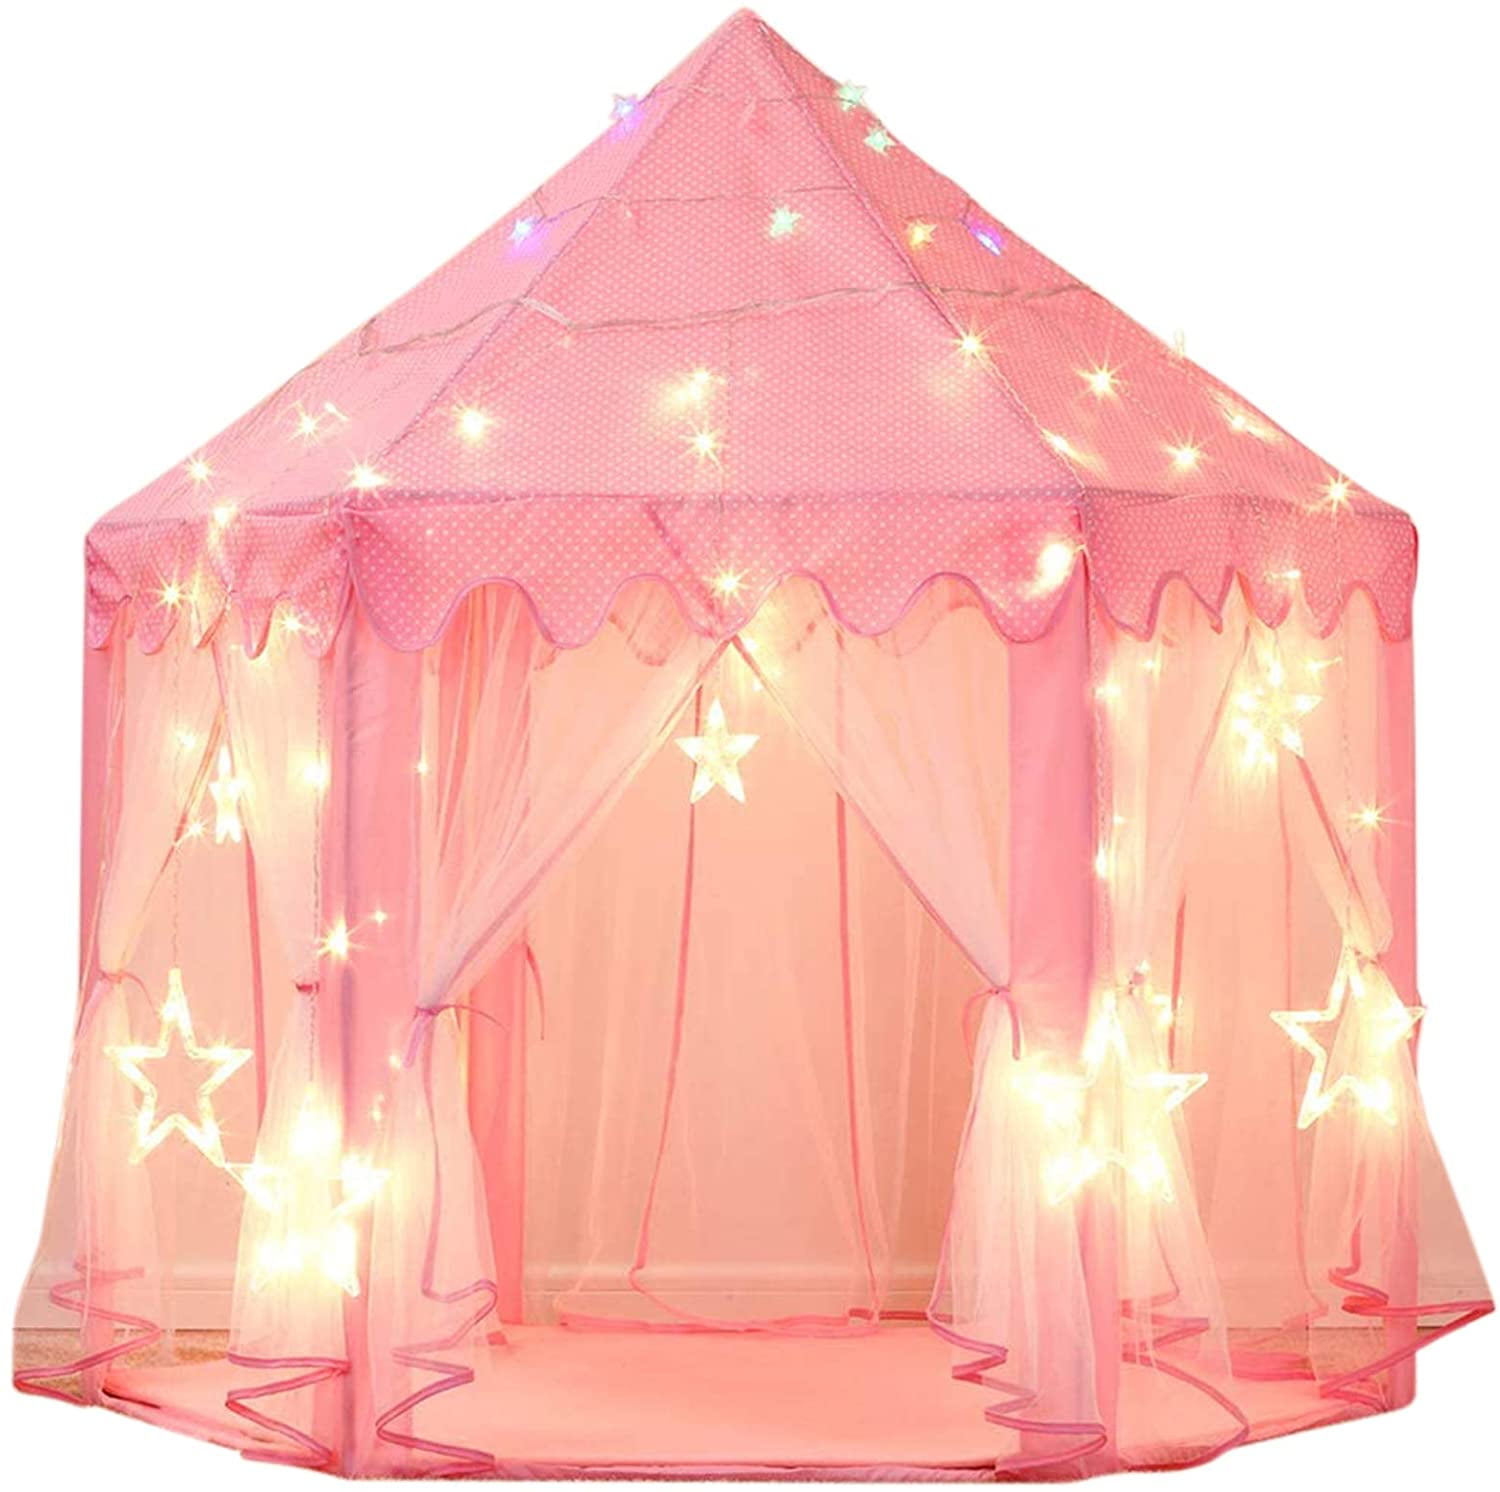 Cute Pop Up Play Tent Girls Boys Palace Castle Indoor Outdoor Kids Playhouse HH 